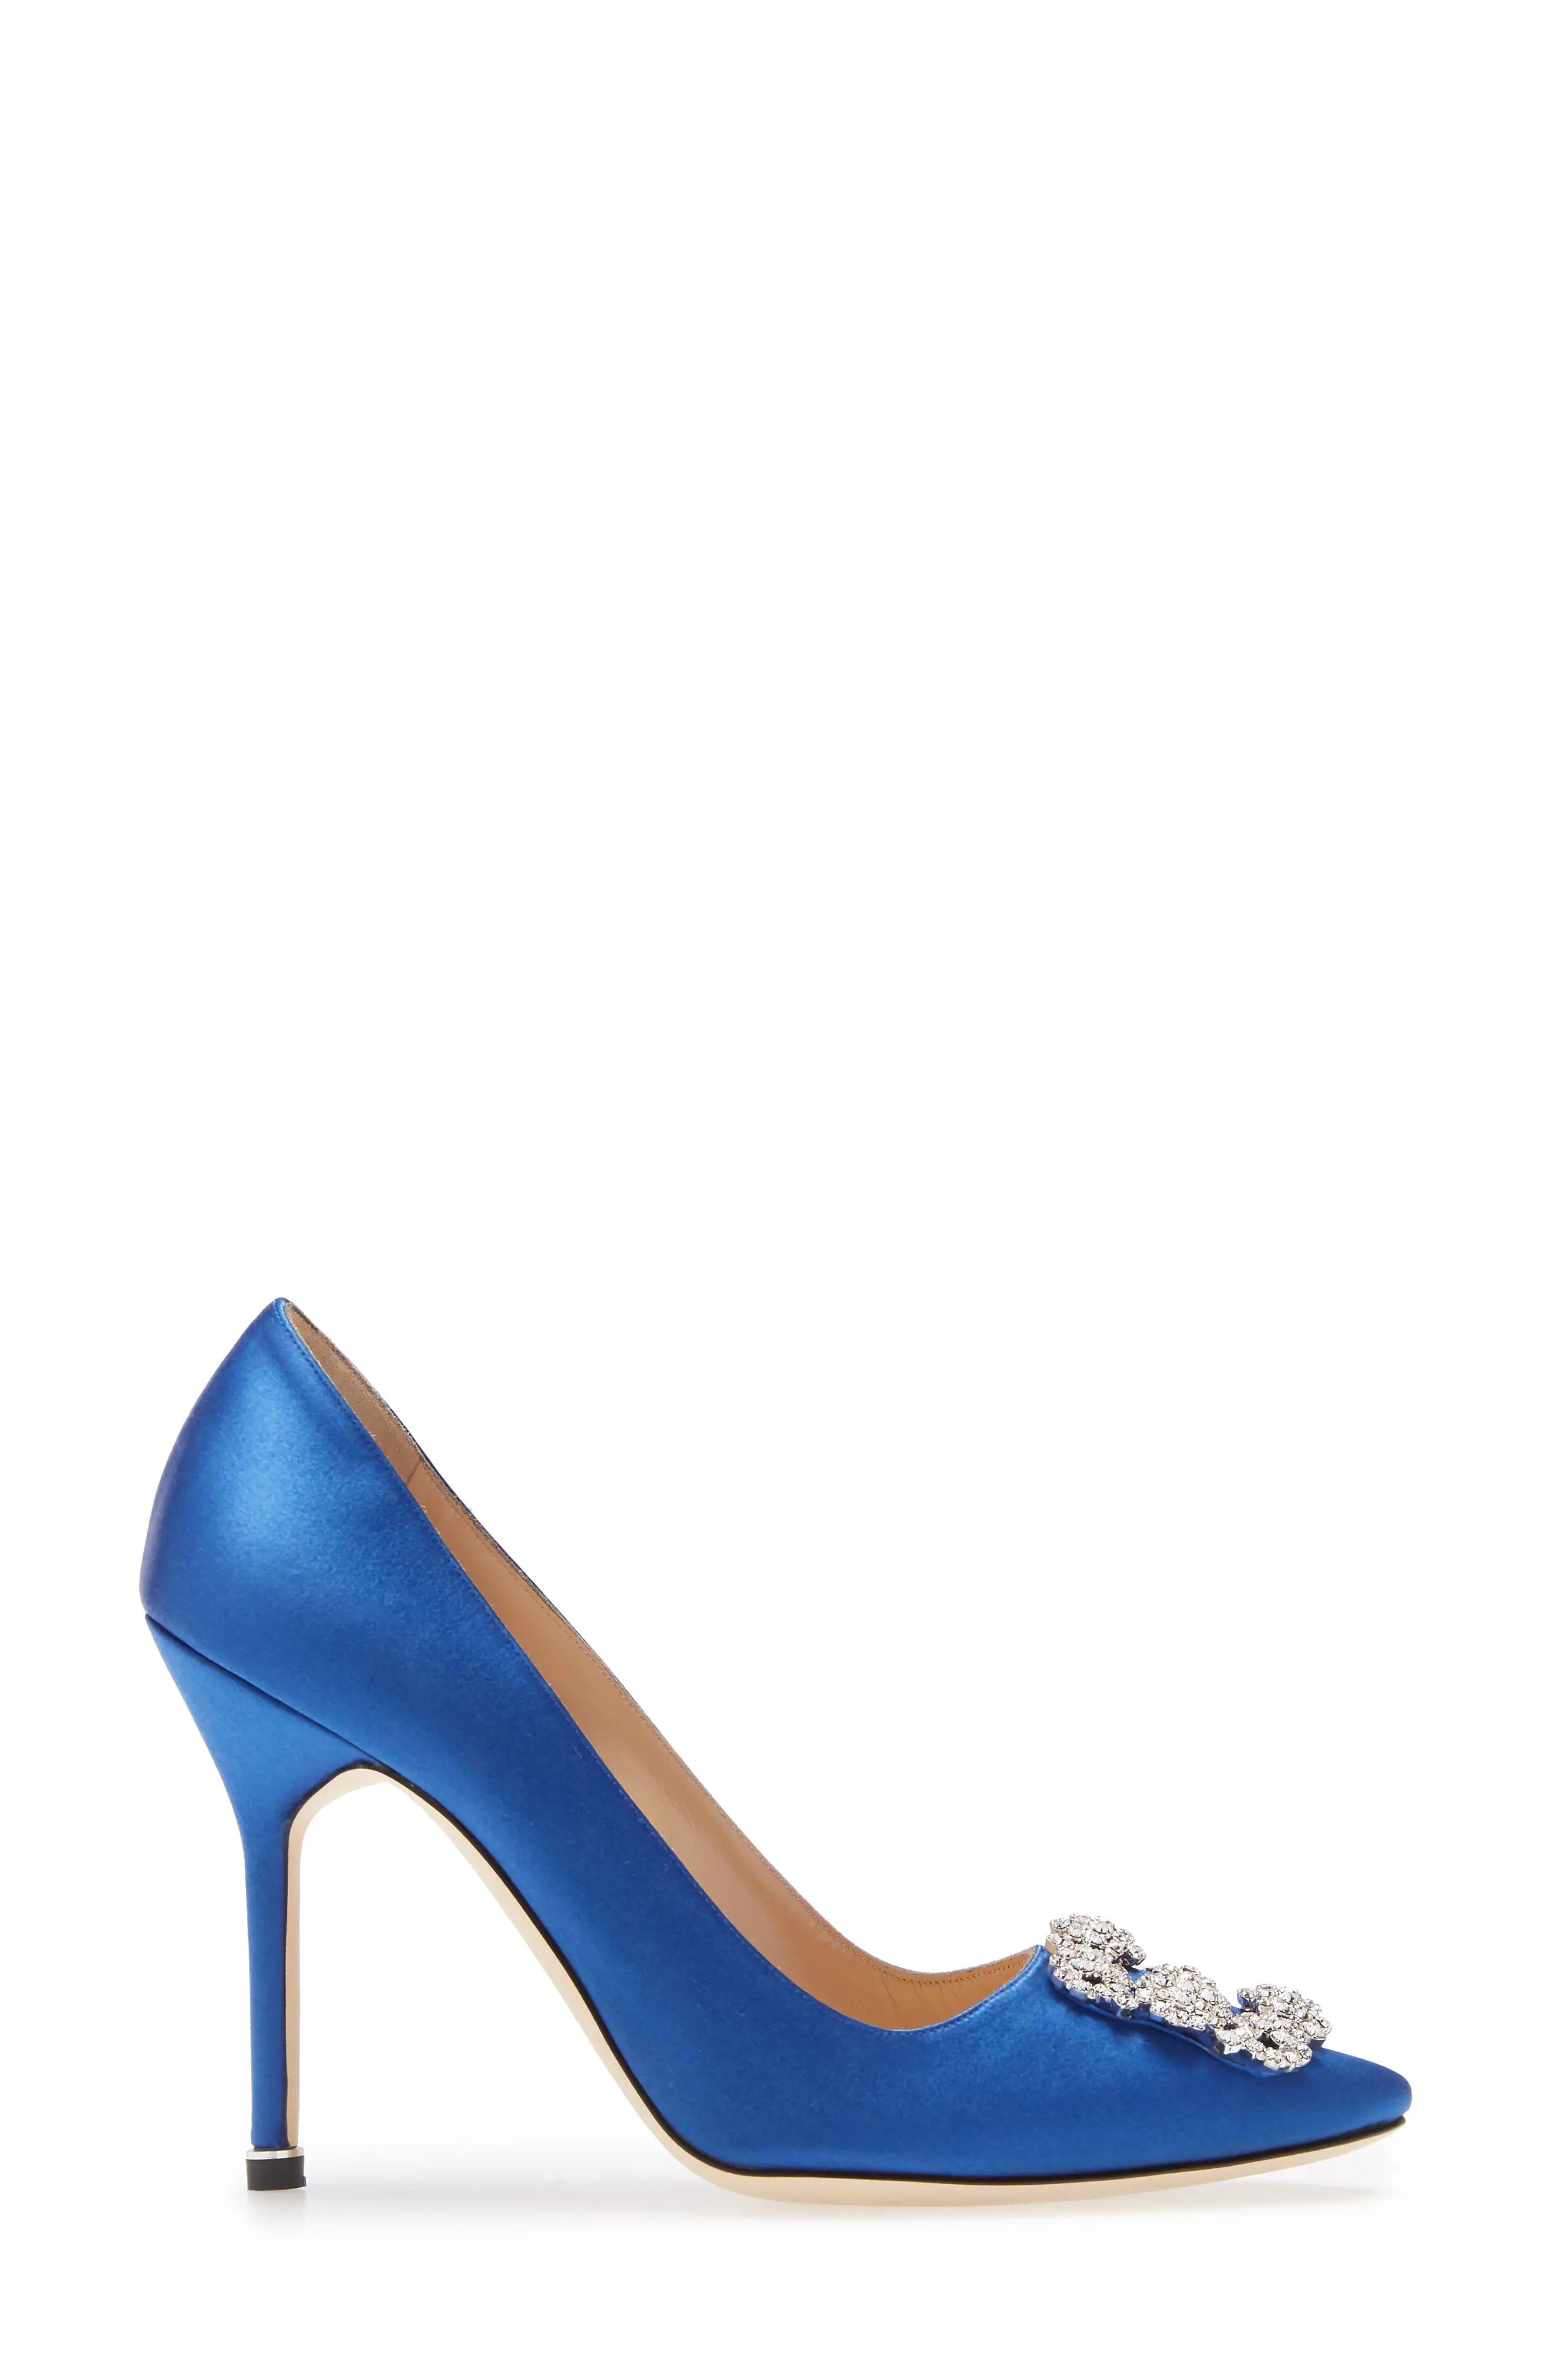 Hangisi Pointed Toe Pump in Blue Satin/Clear - 3